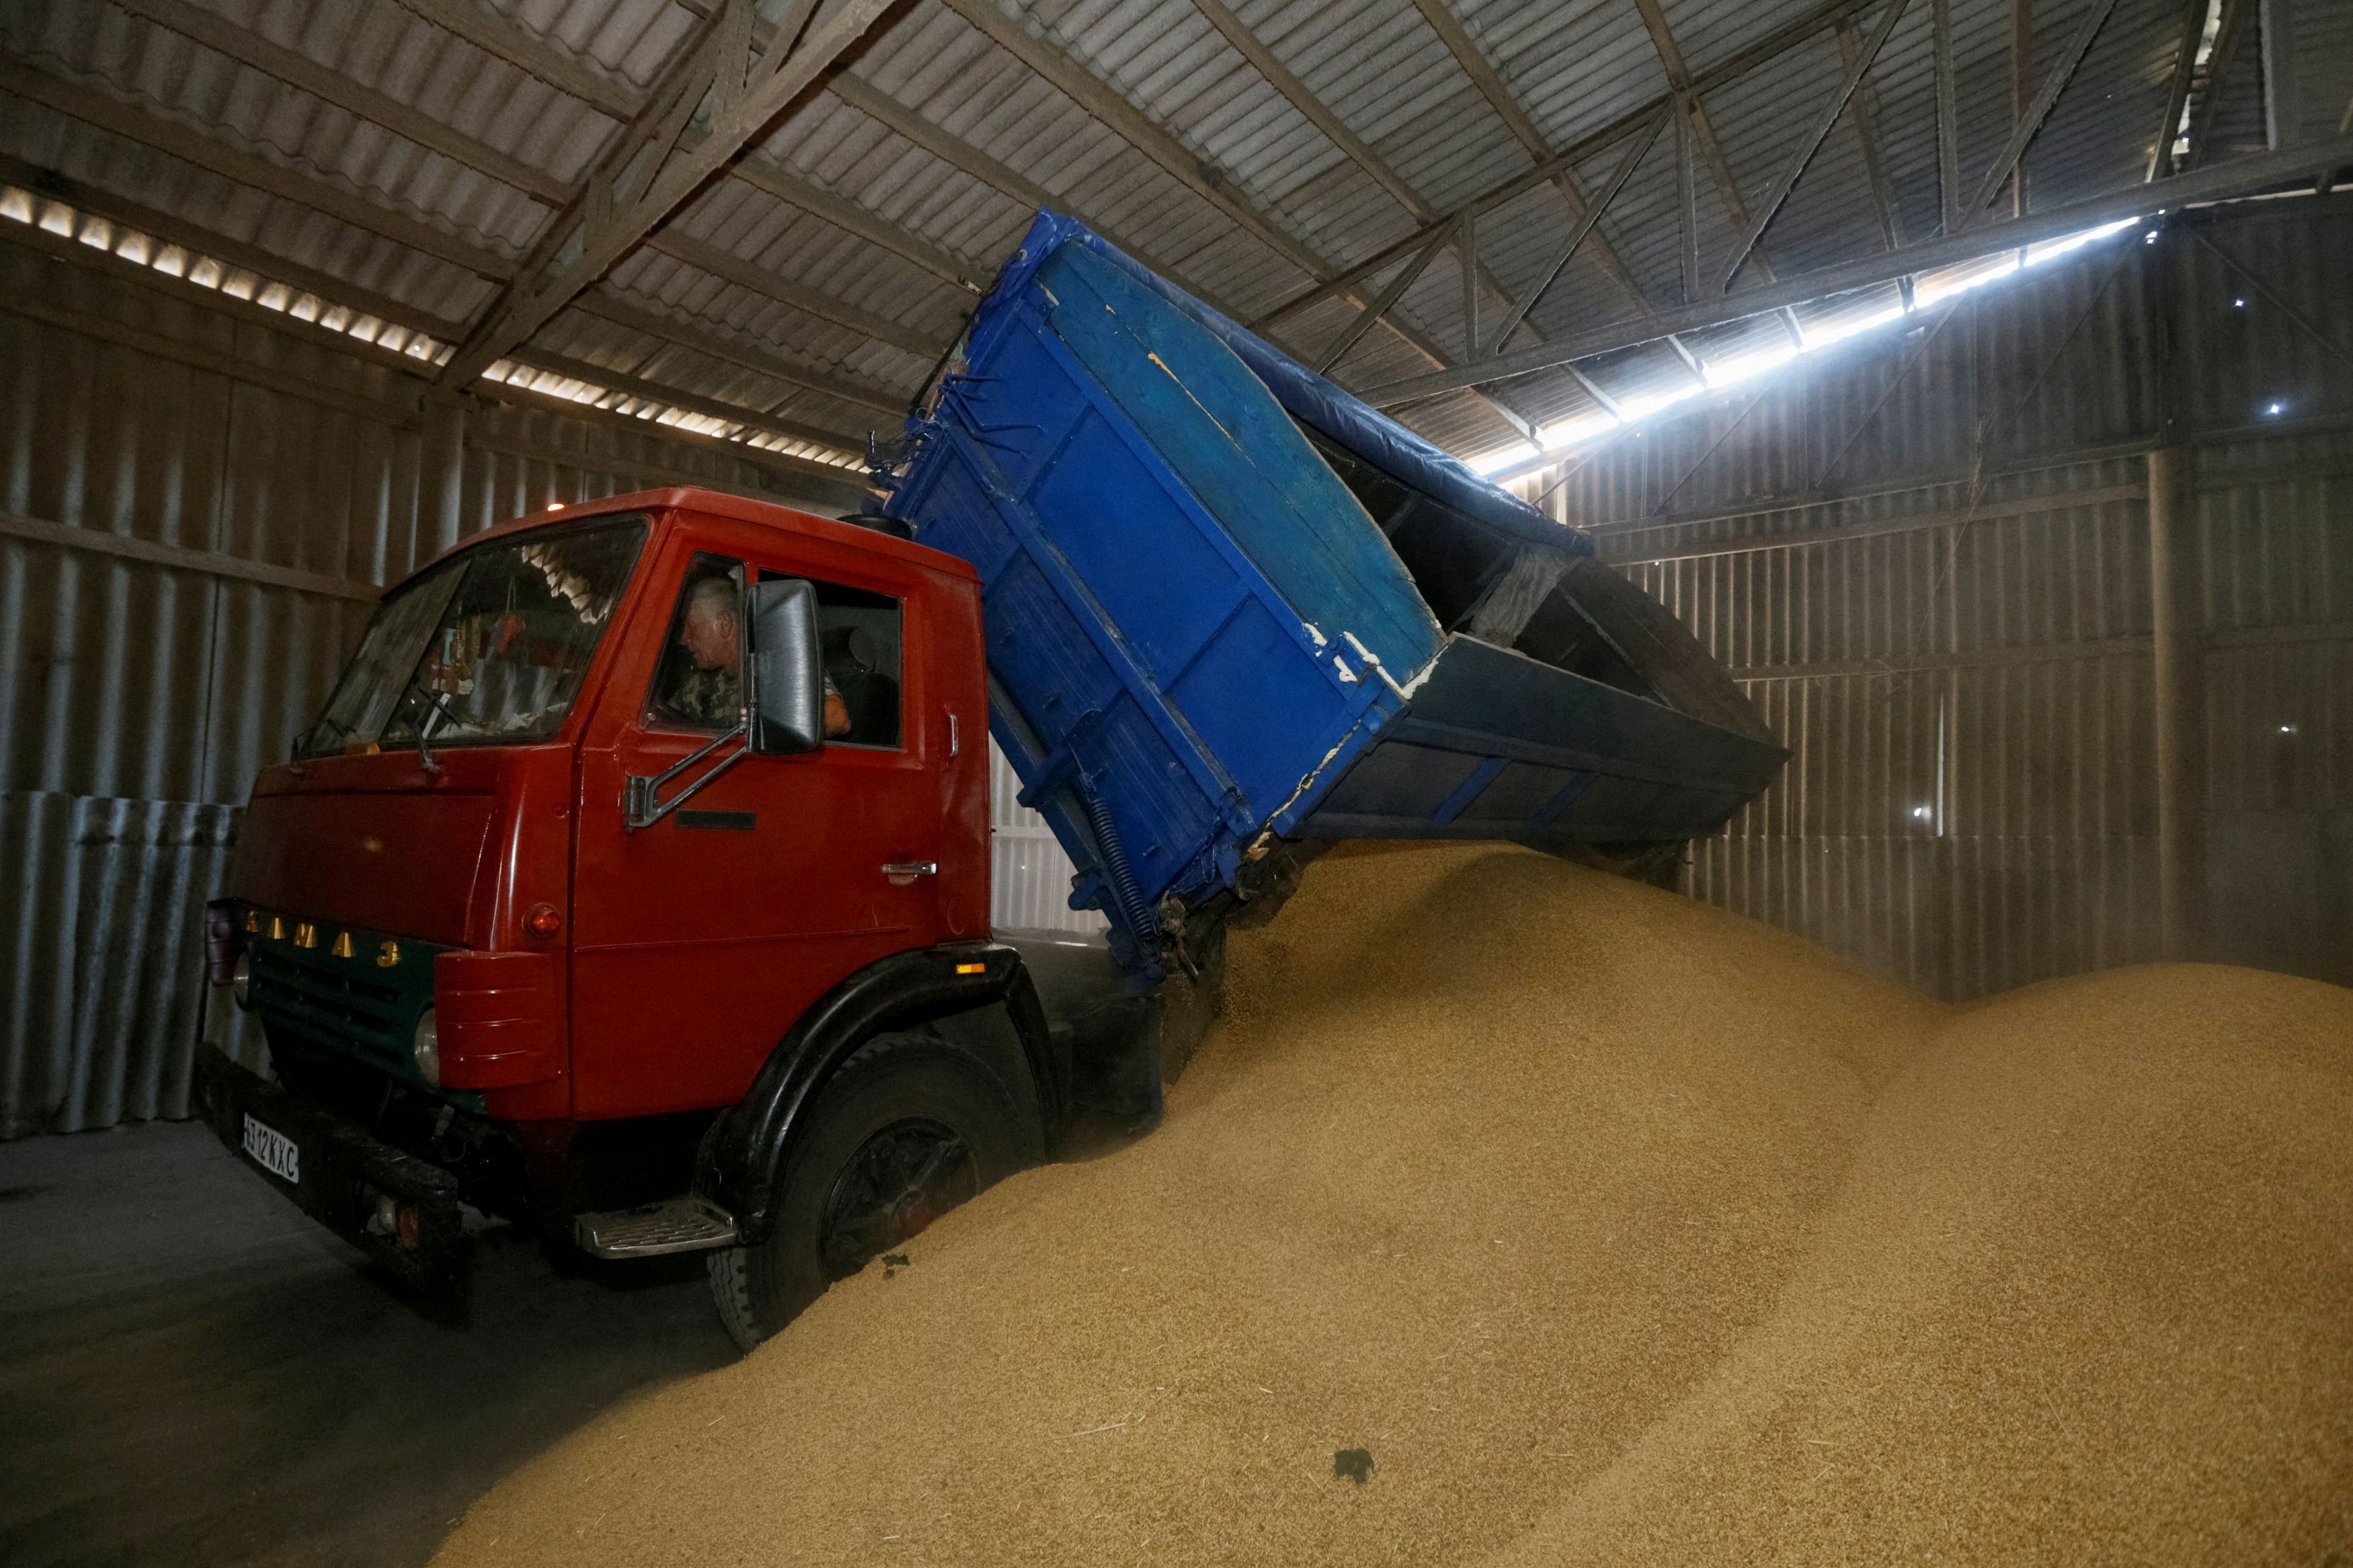 A truck unloads at a grain store during barley harvesting in the Kiev region